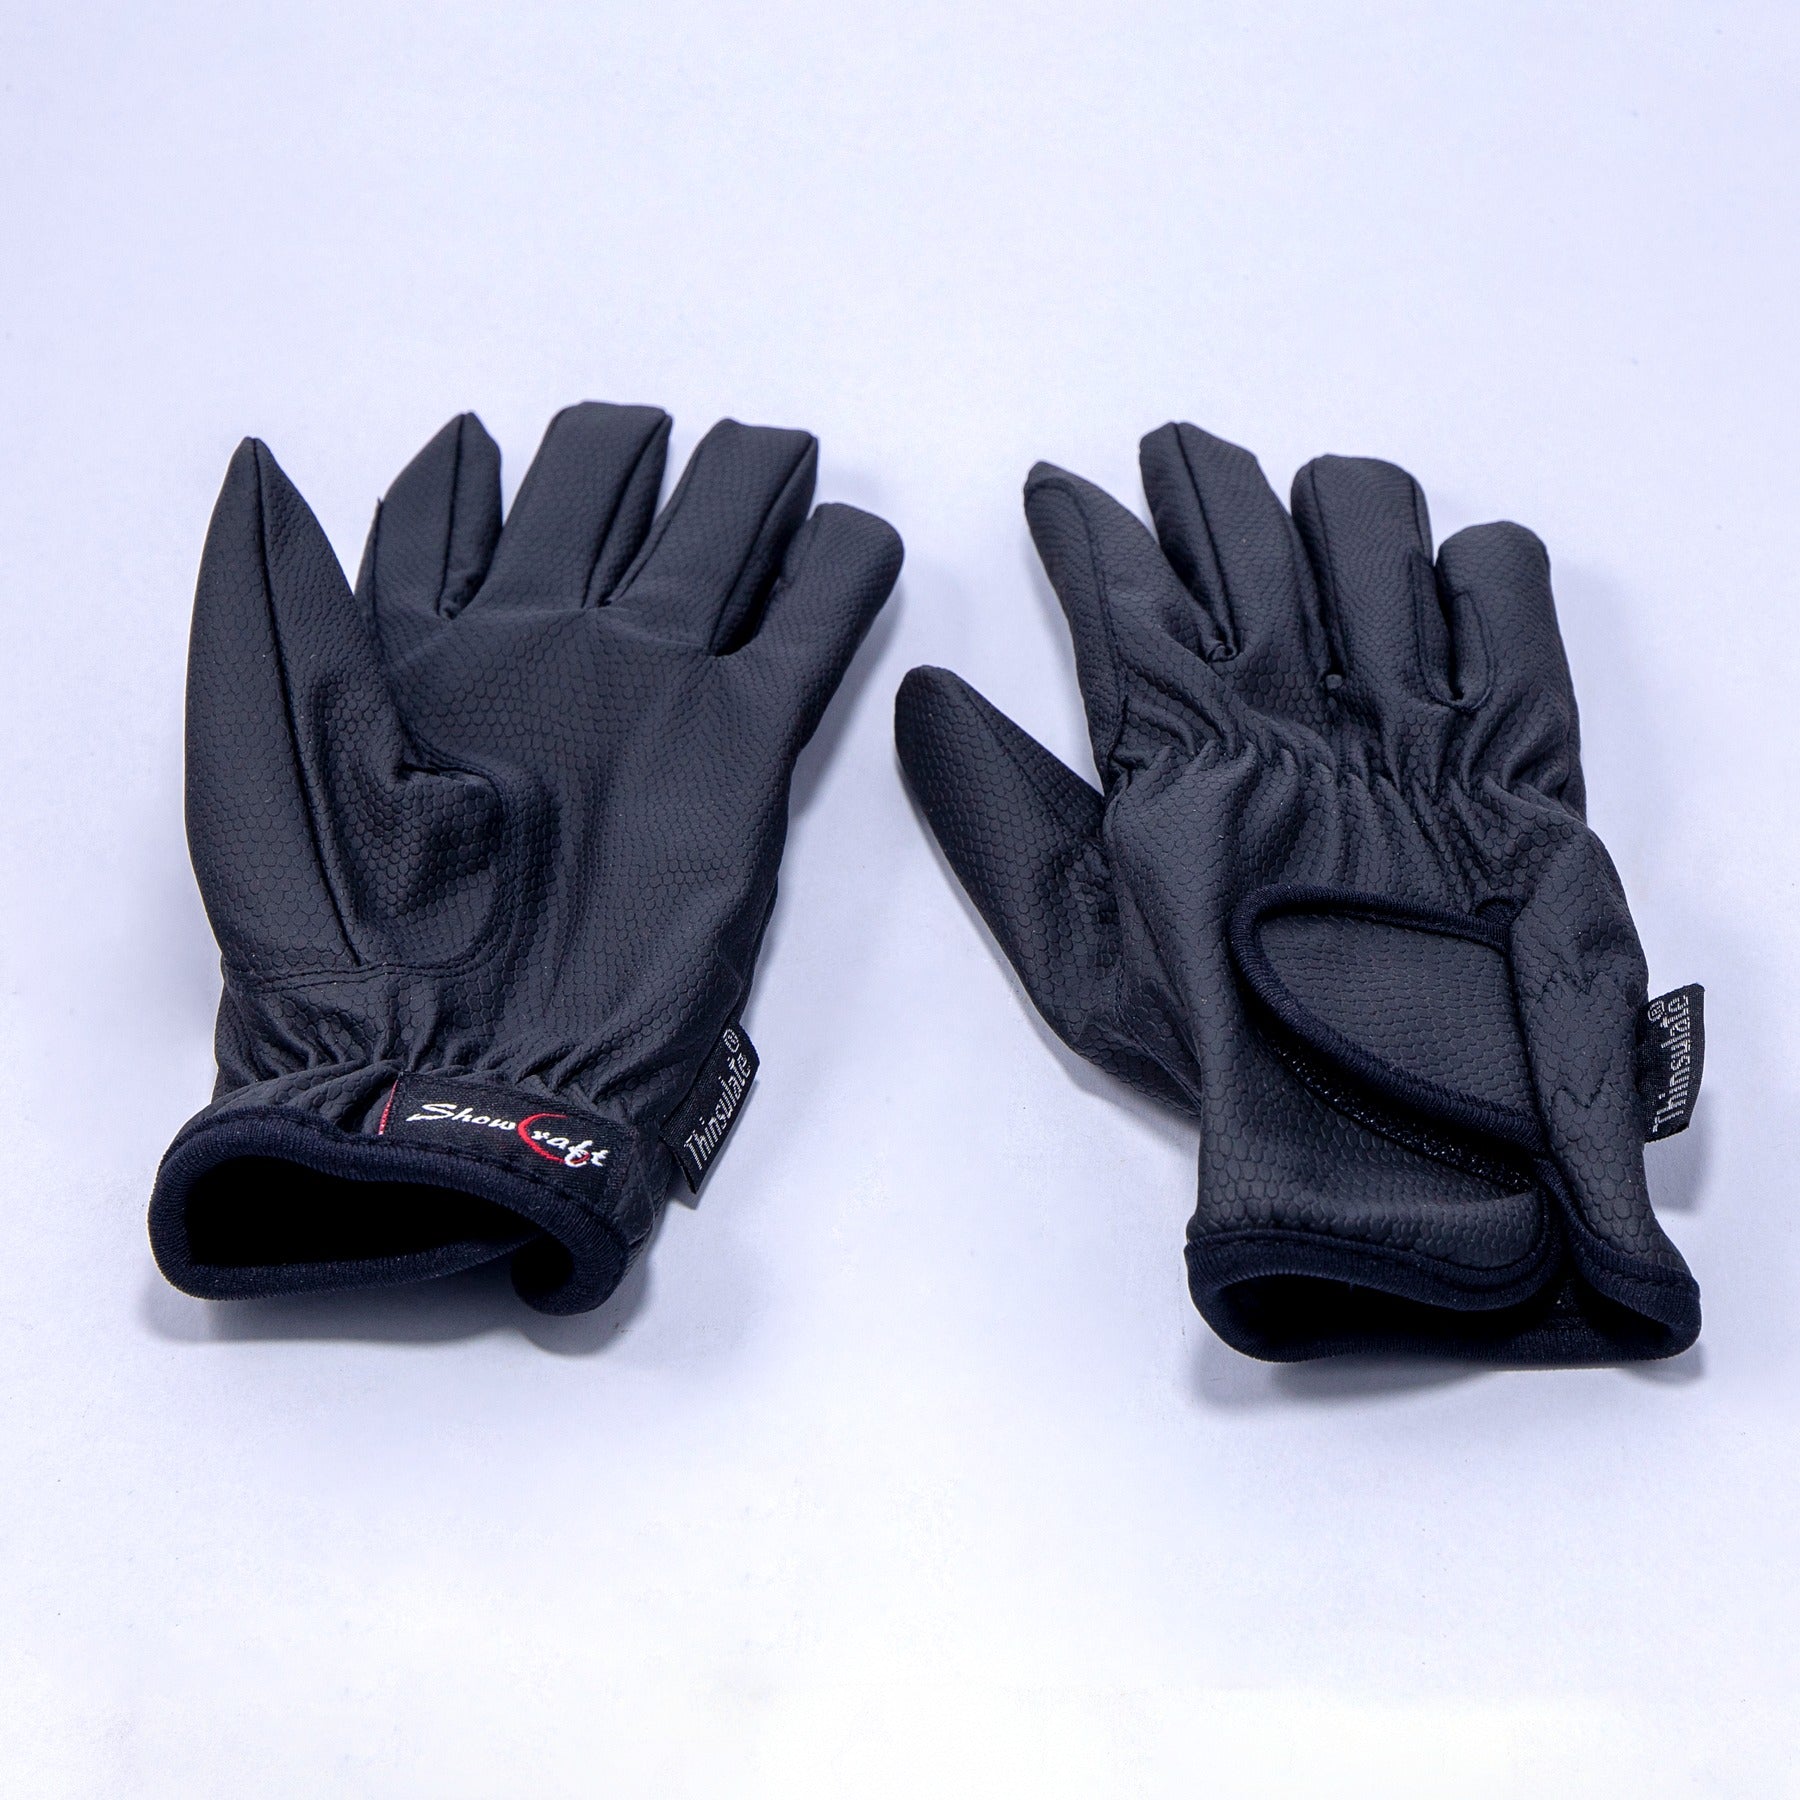 Black gloves with showcraft tag